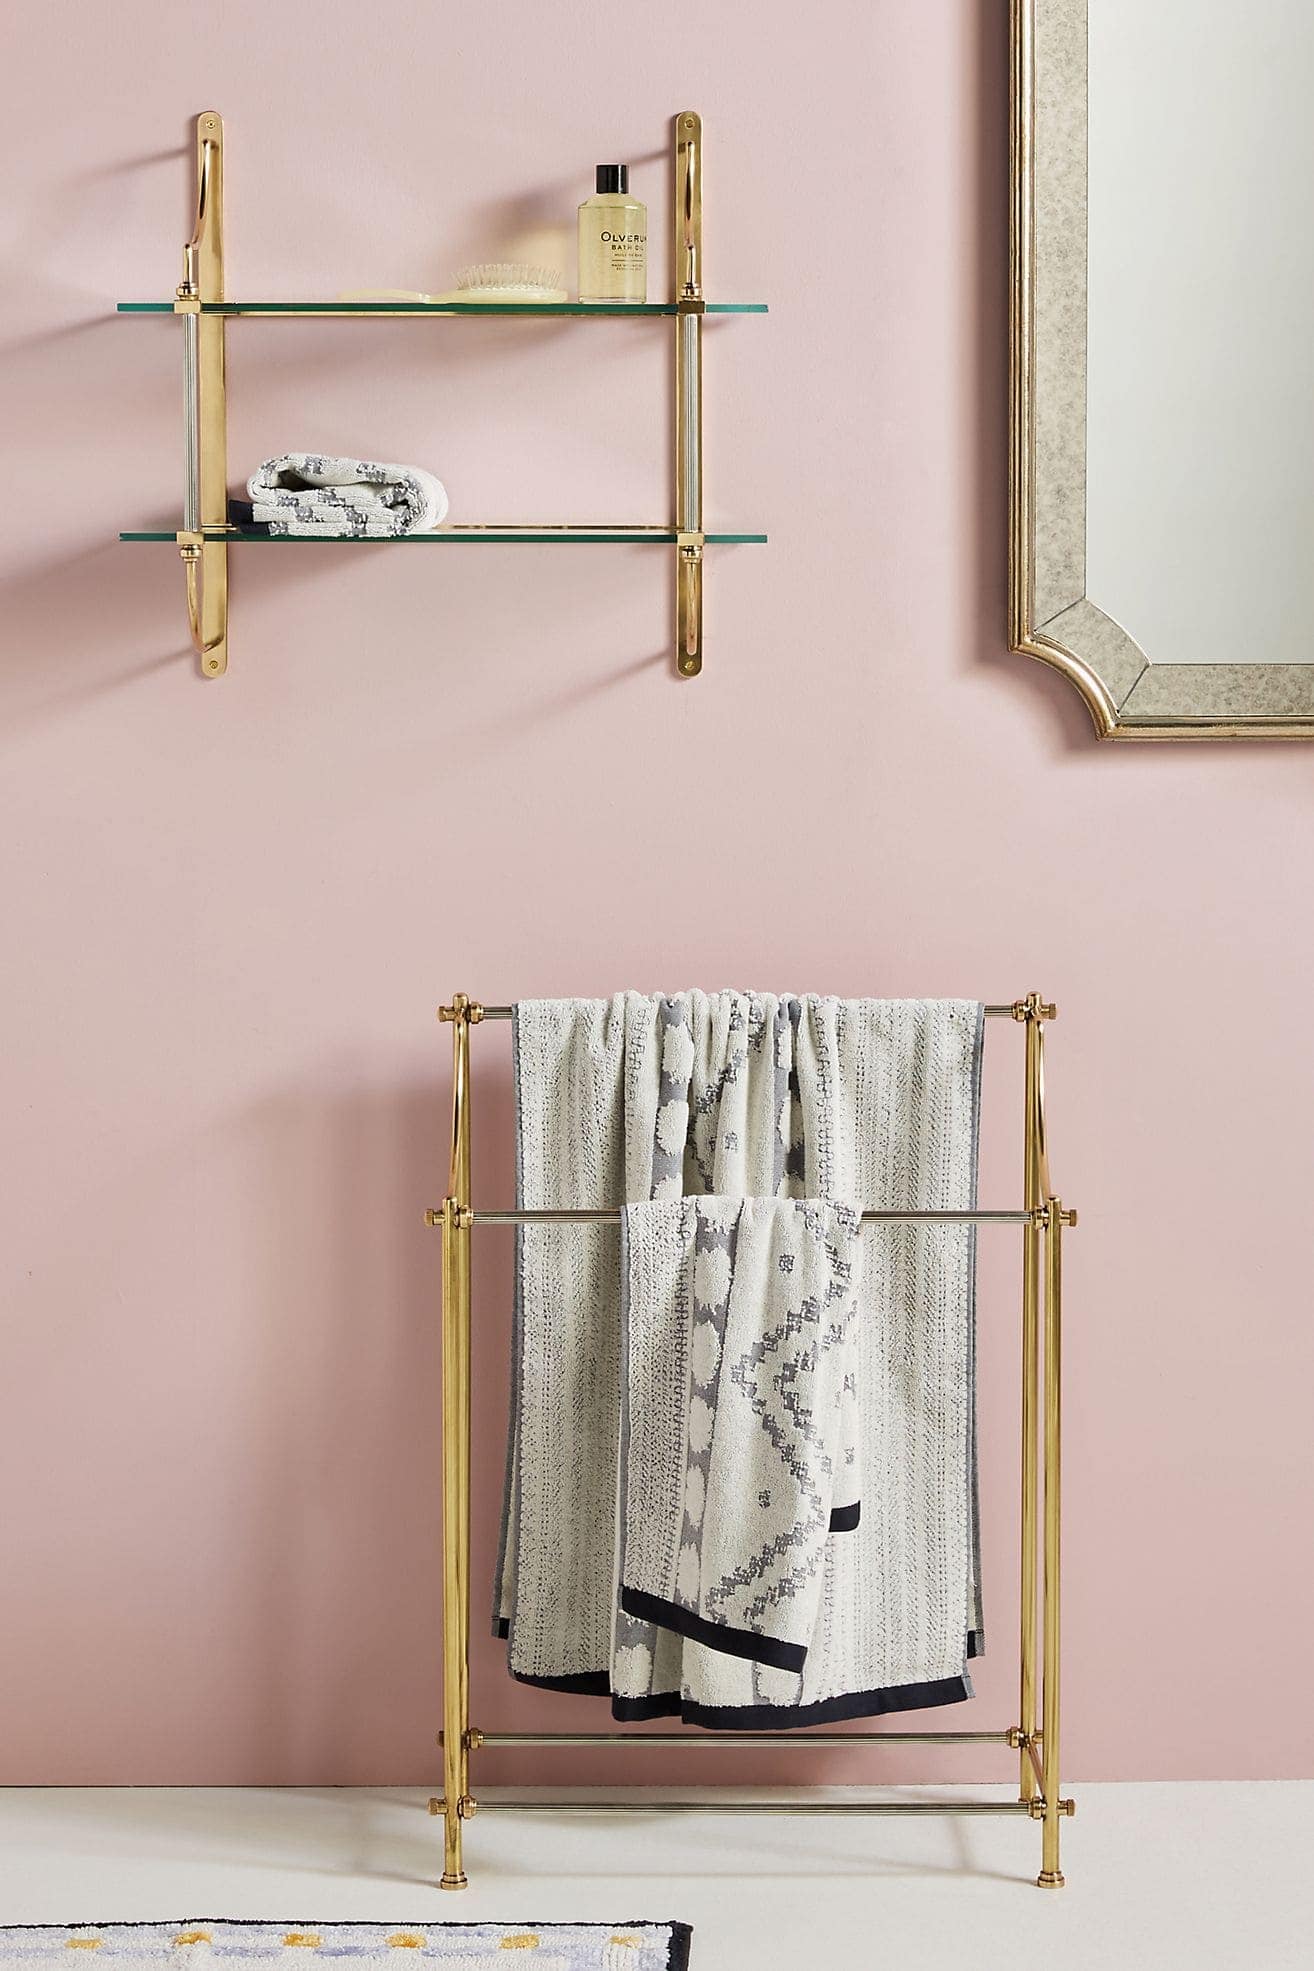 Gold Accents in a Pink and Grey Bathroom